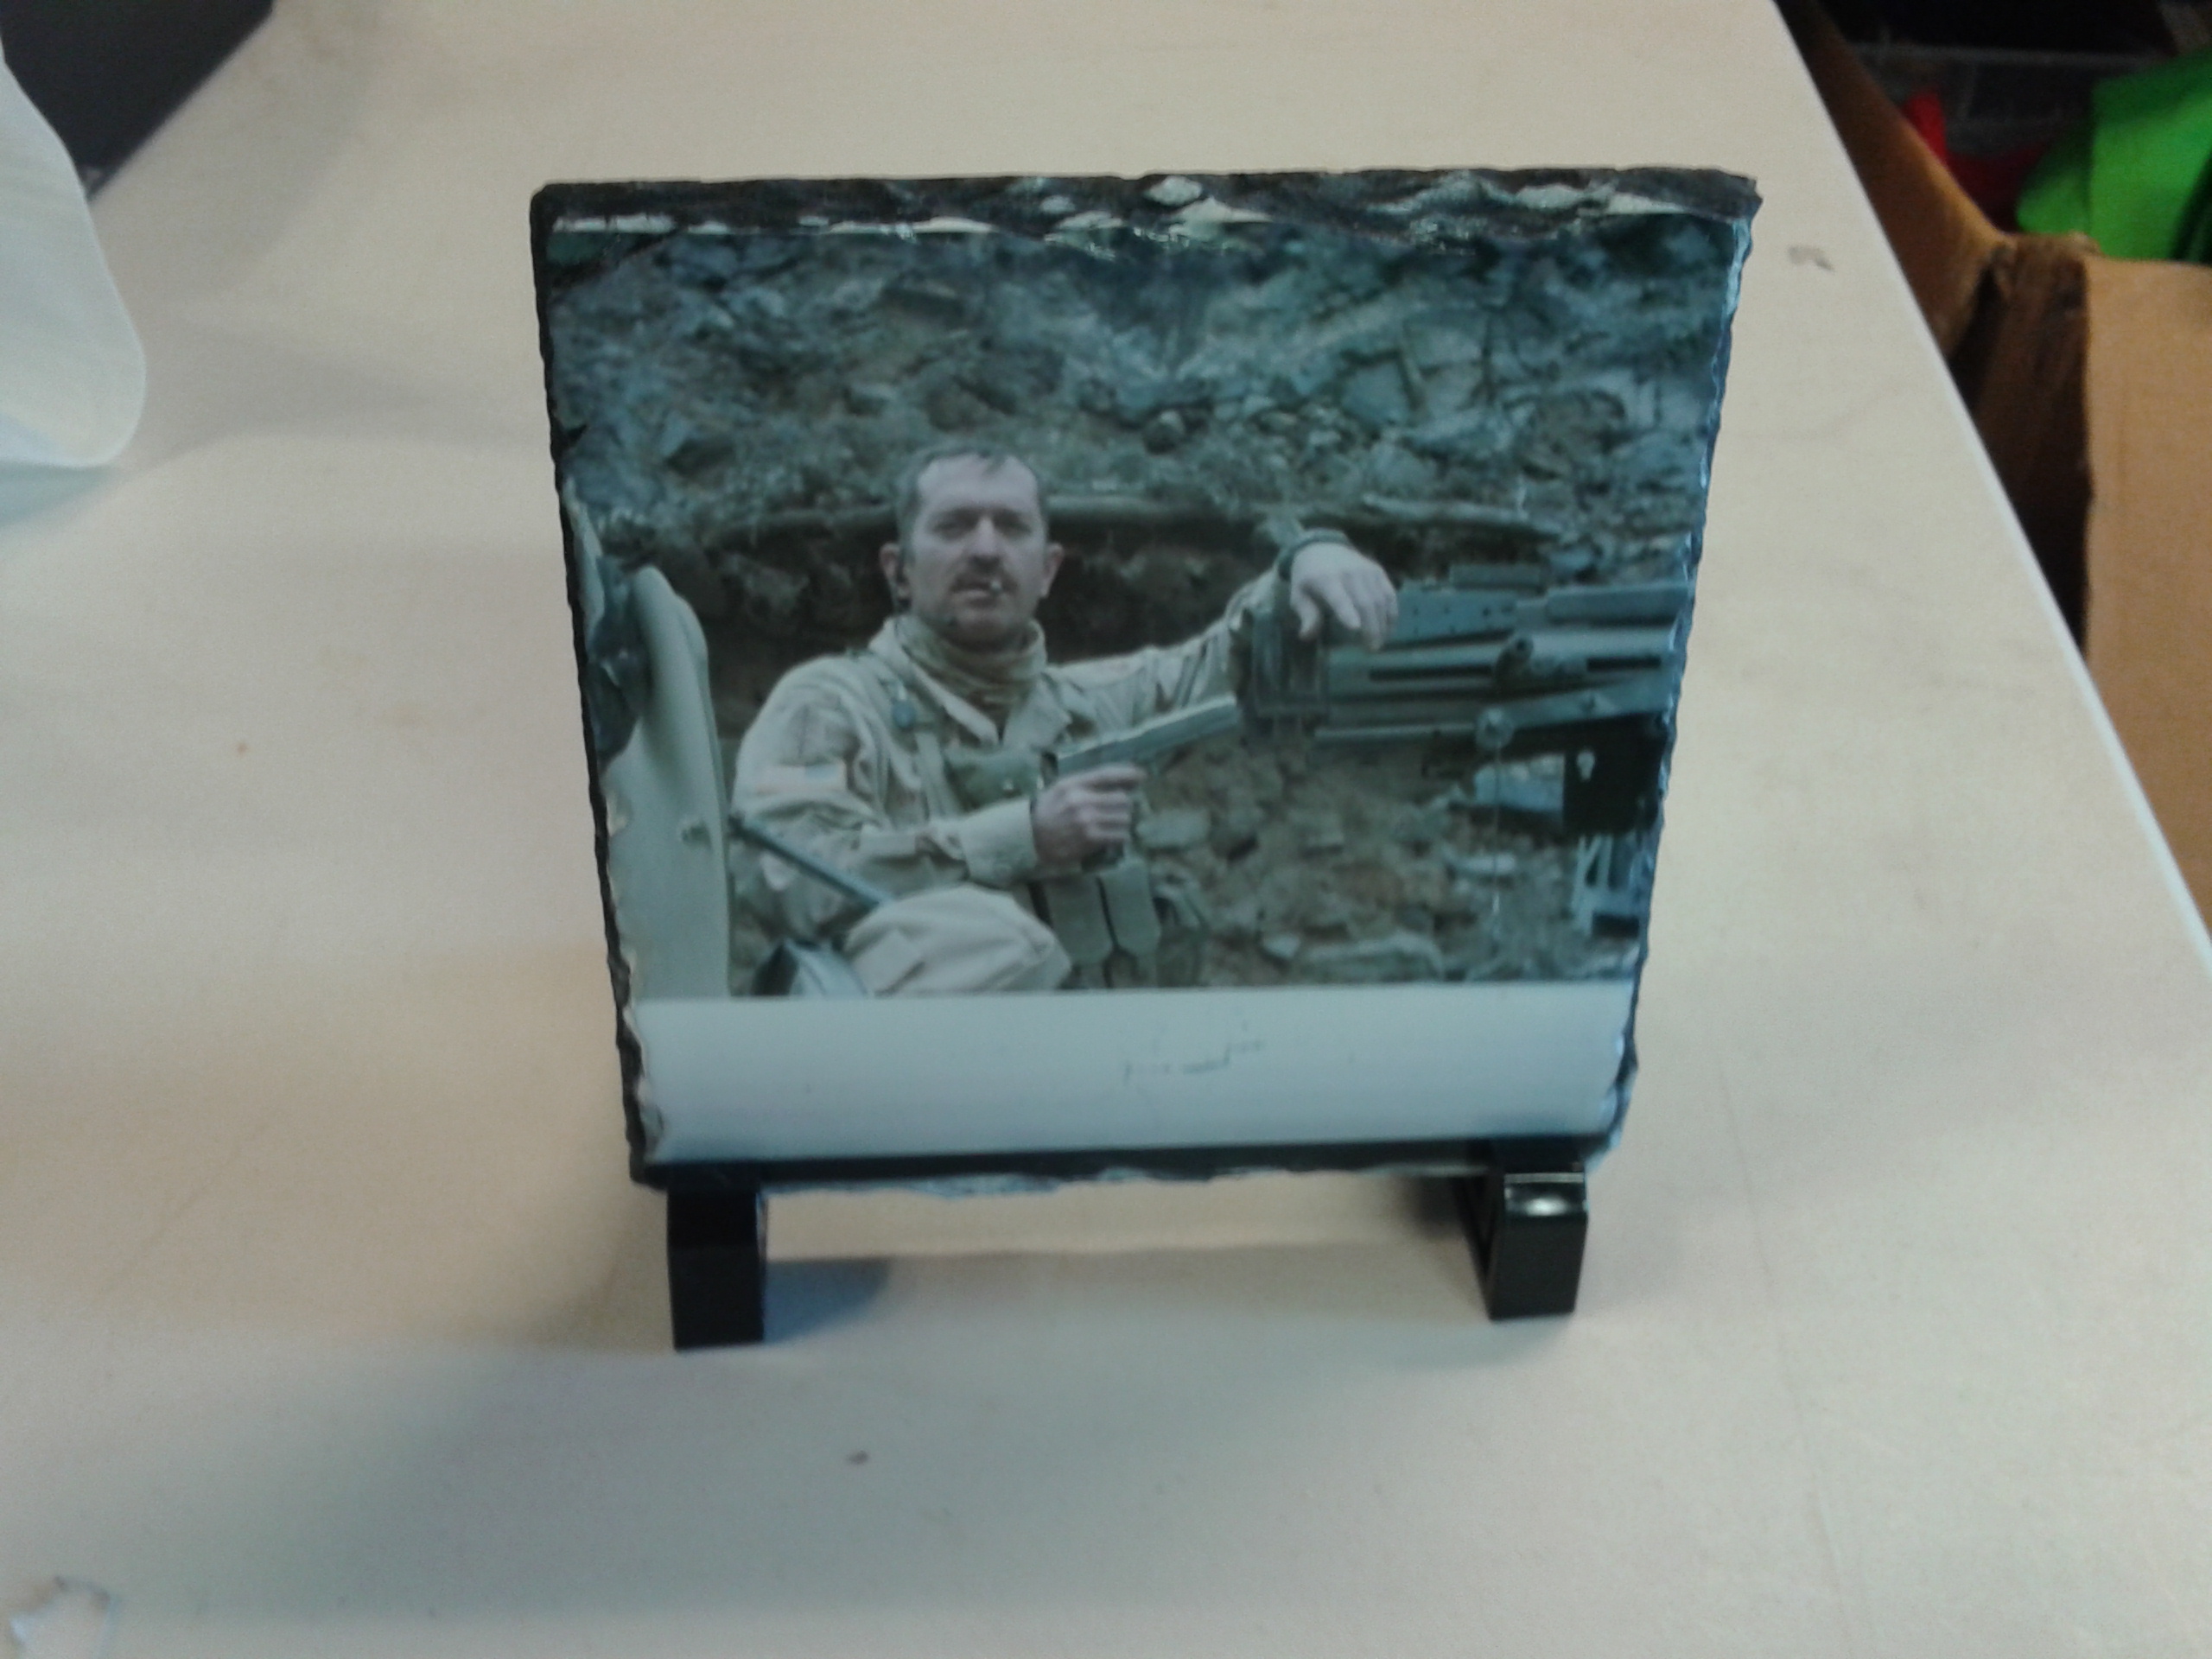 Active Duty made with sublimation printing